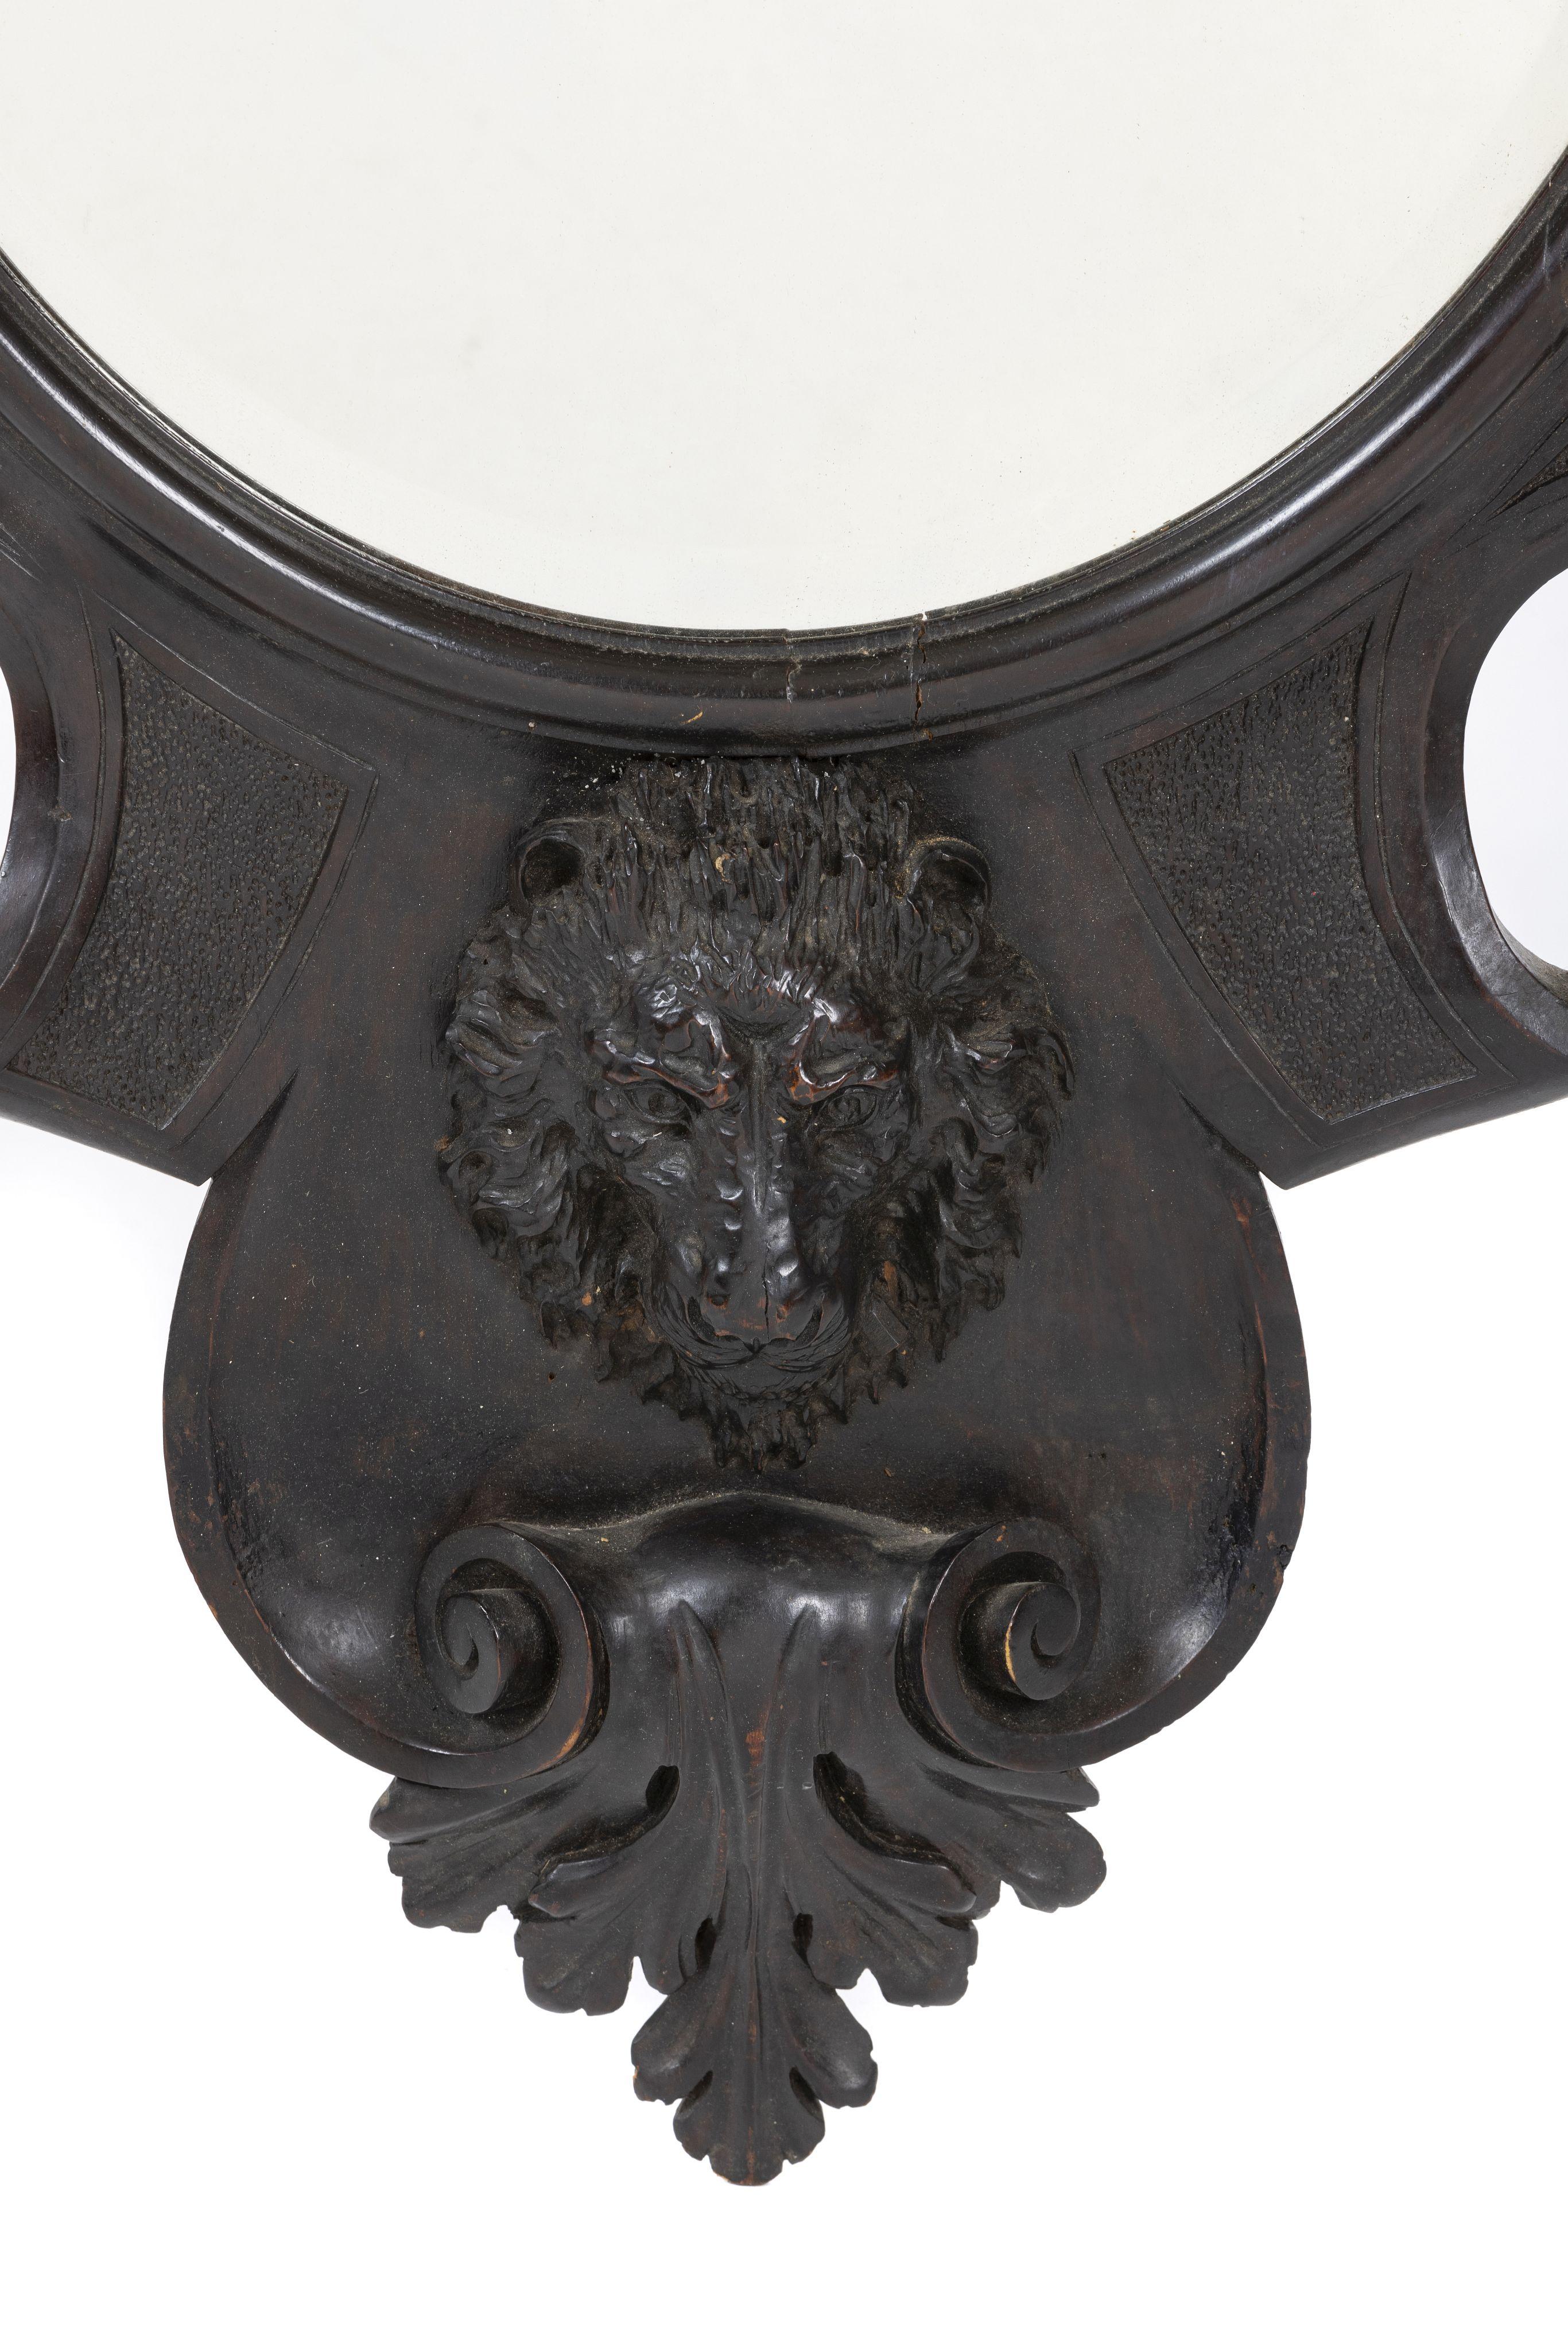 19th Century Large Italian Rococo Revival Carved Cherub Oval Mirror, 19thC  For Sale